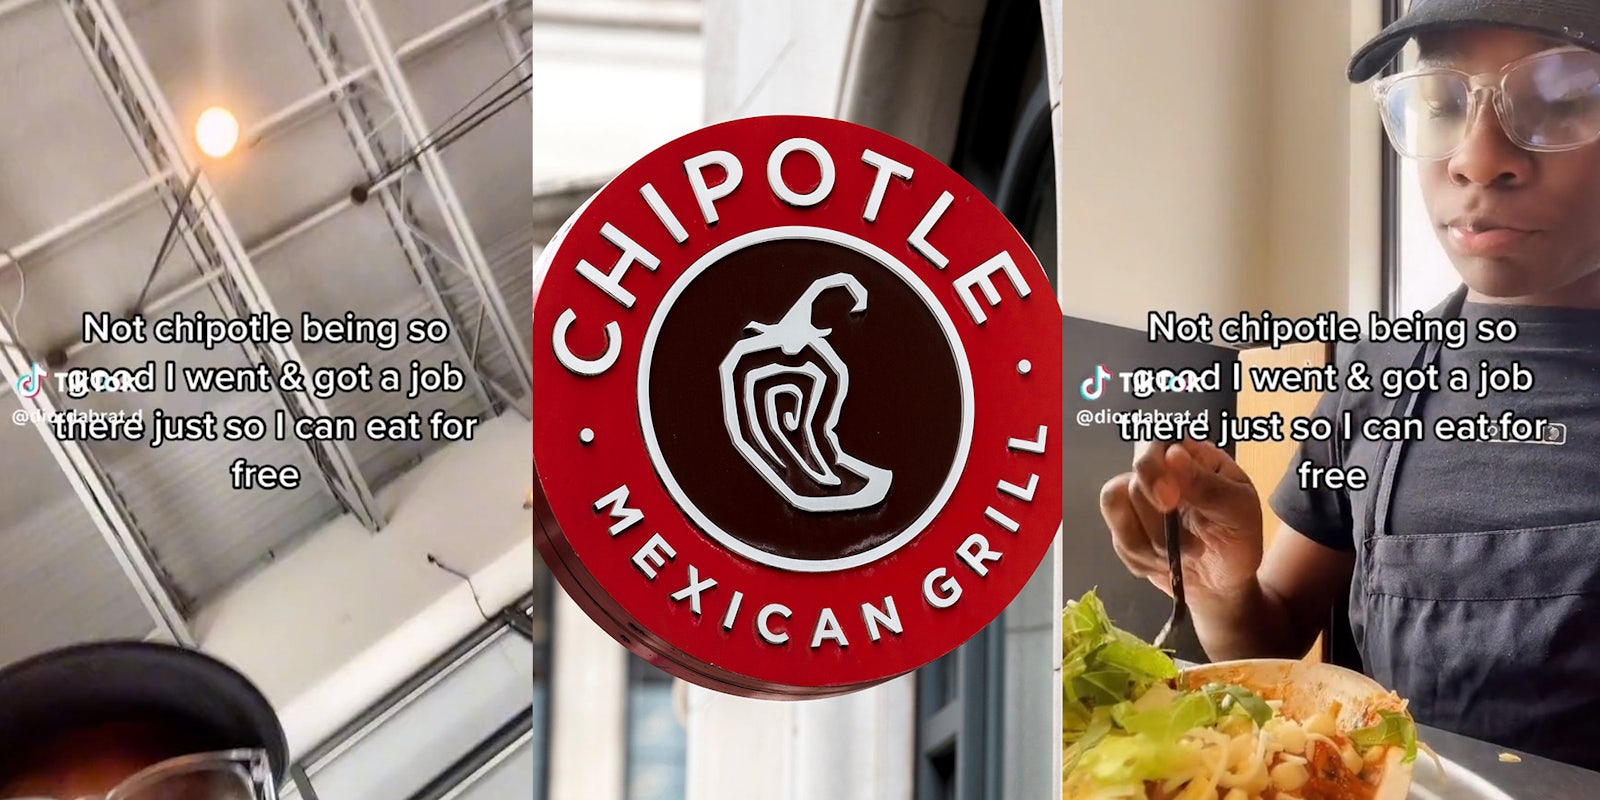 Worker explains that they got a job at Chipotle just so they can eat their food for free